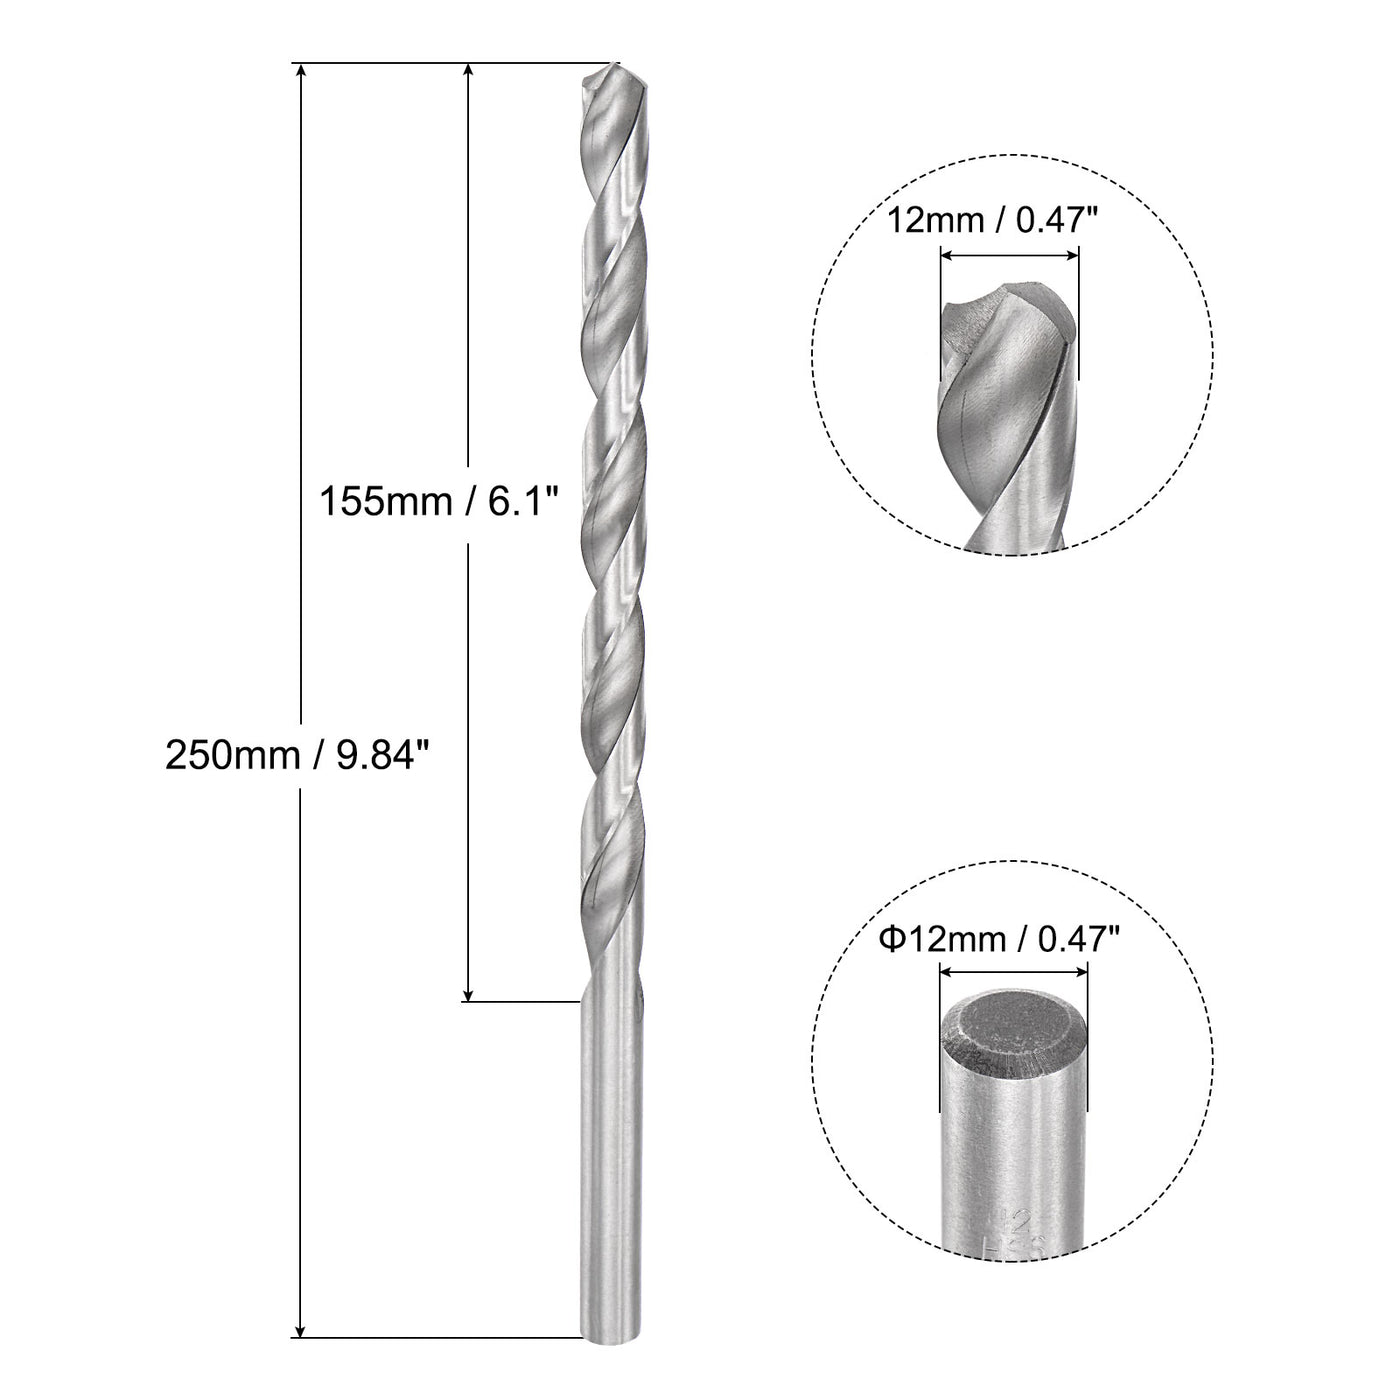 uxcell Uxcell 12mm Twist Drill Bits, High-Speed Steel Extra Long Drill Bit 250mm Length